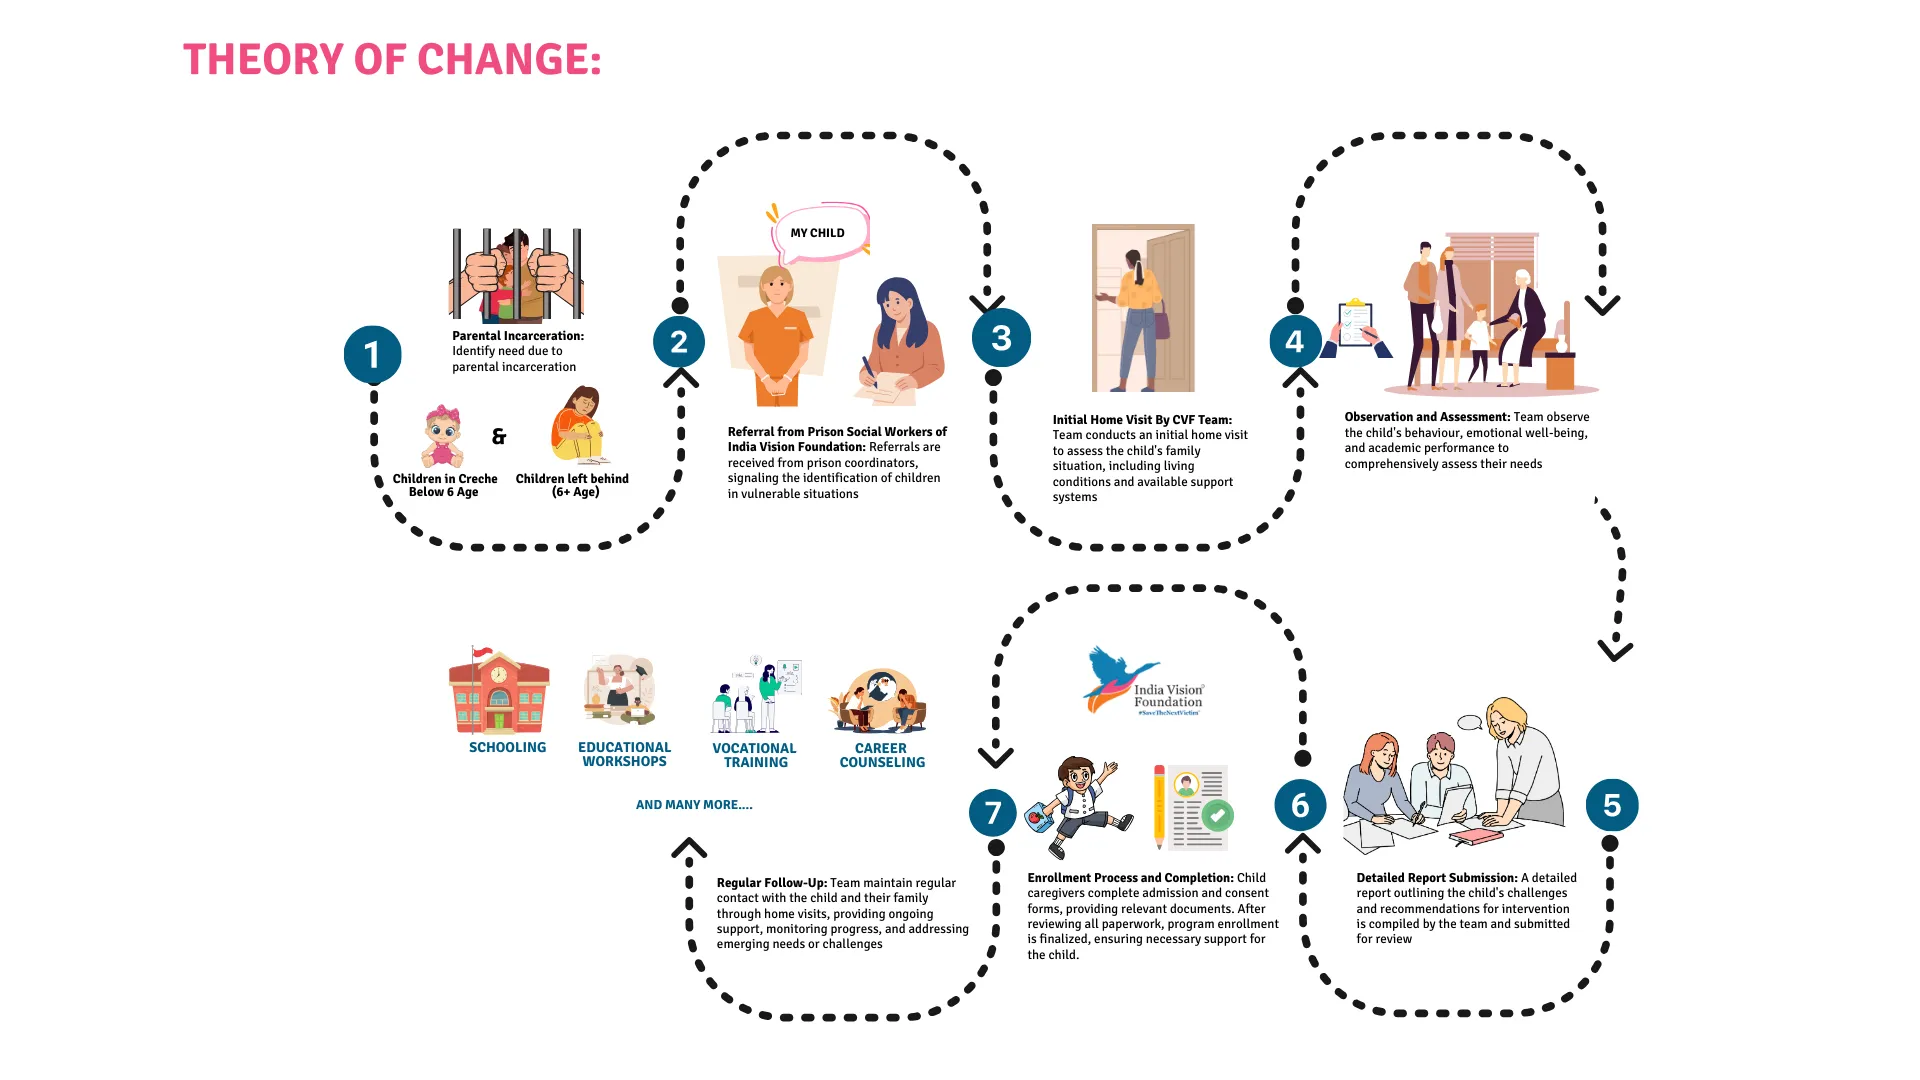 IVF Theory of change